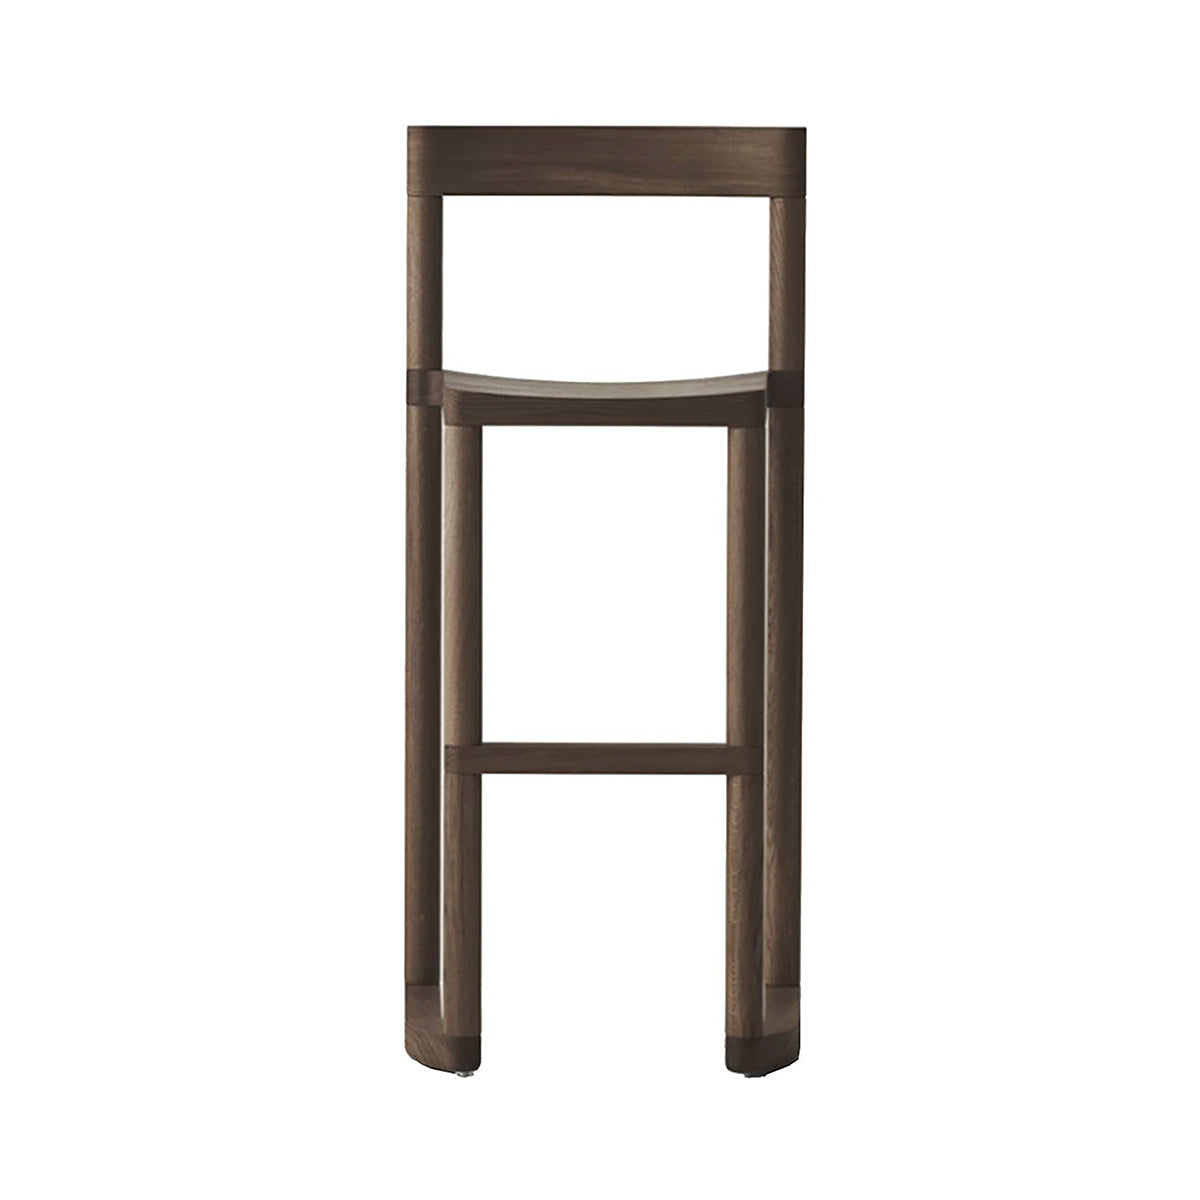 Pier Bar + Counter Stool: Stacking + Bar + Umber Stained Oak